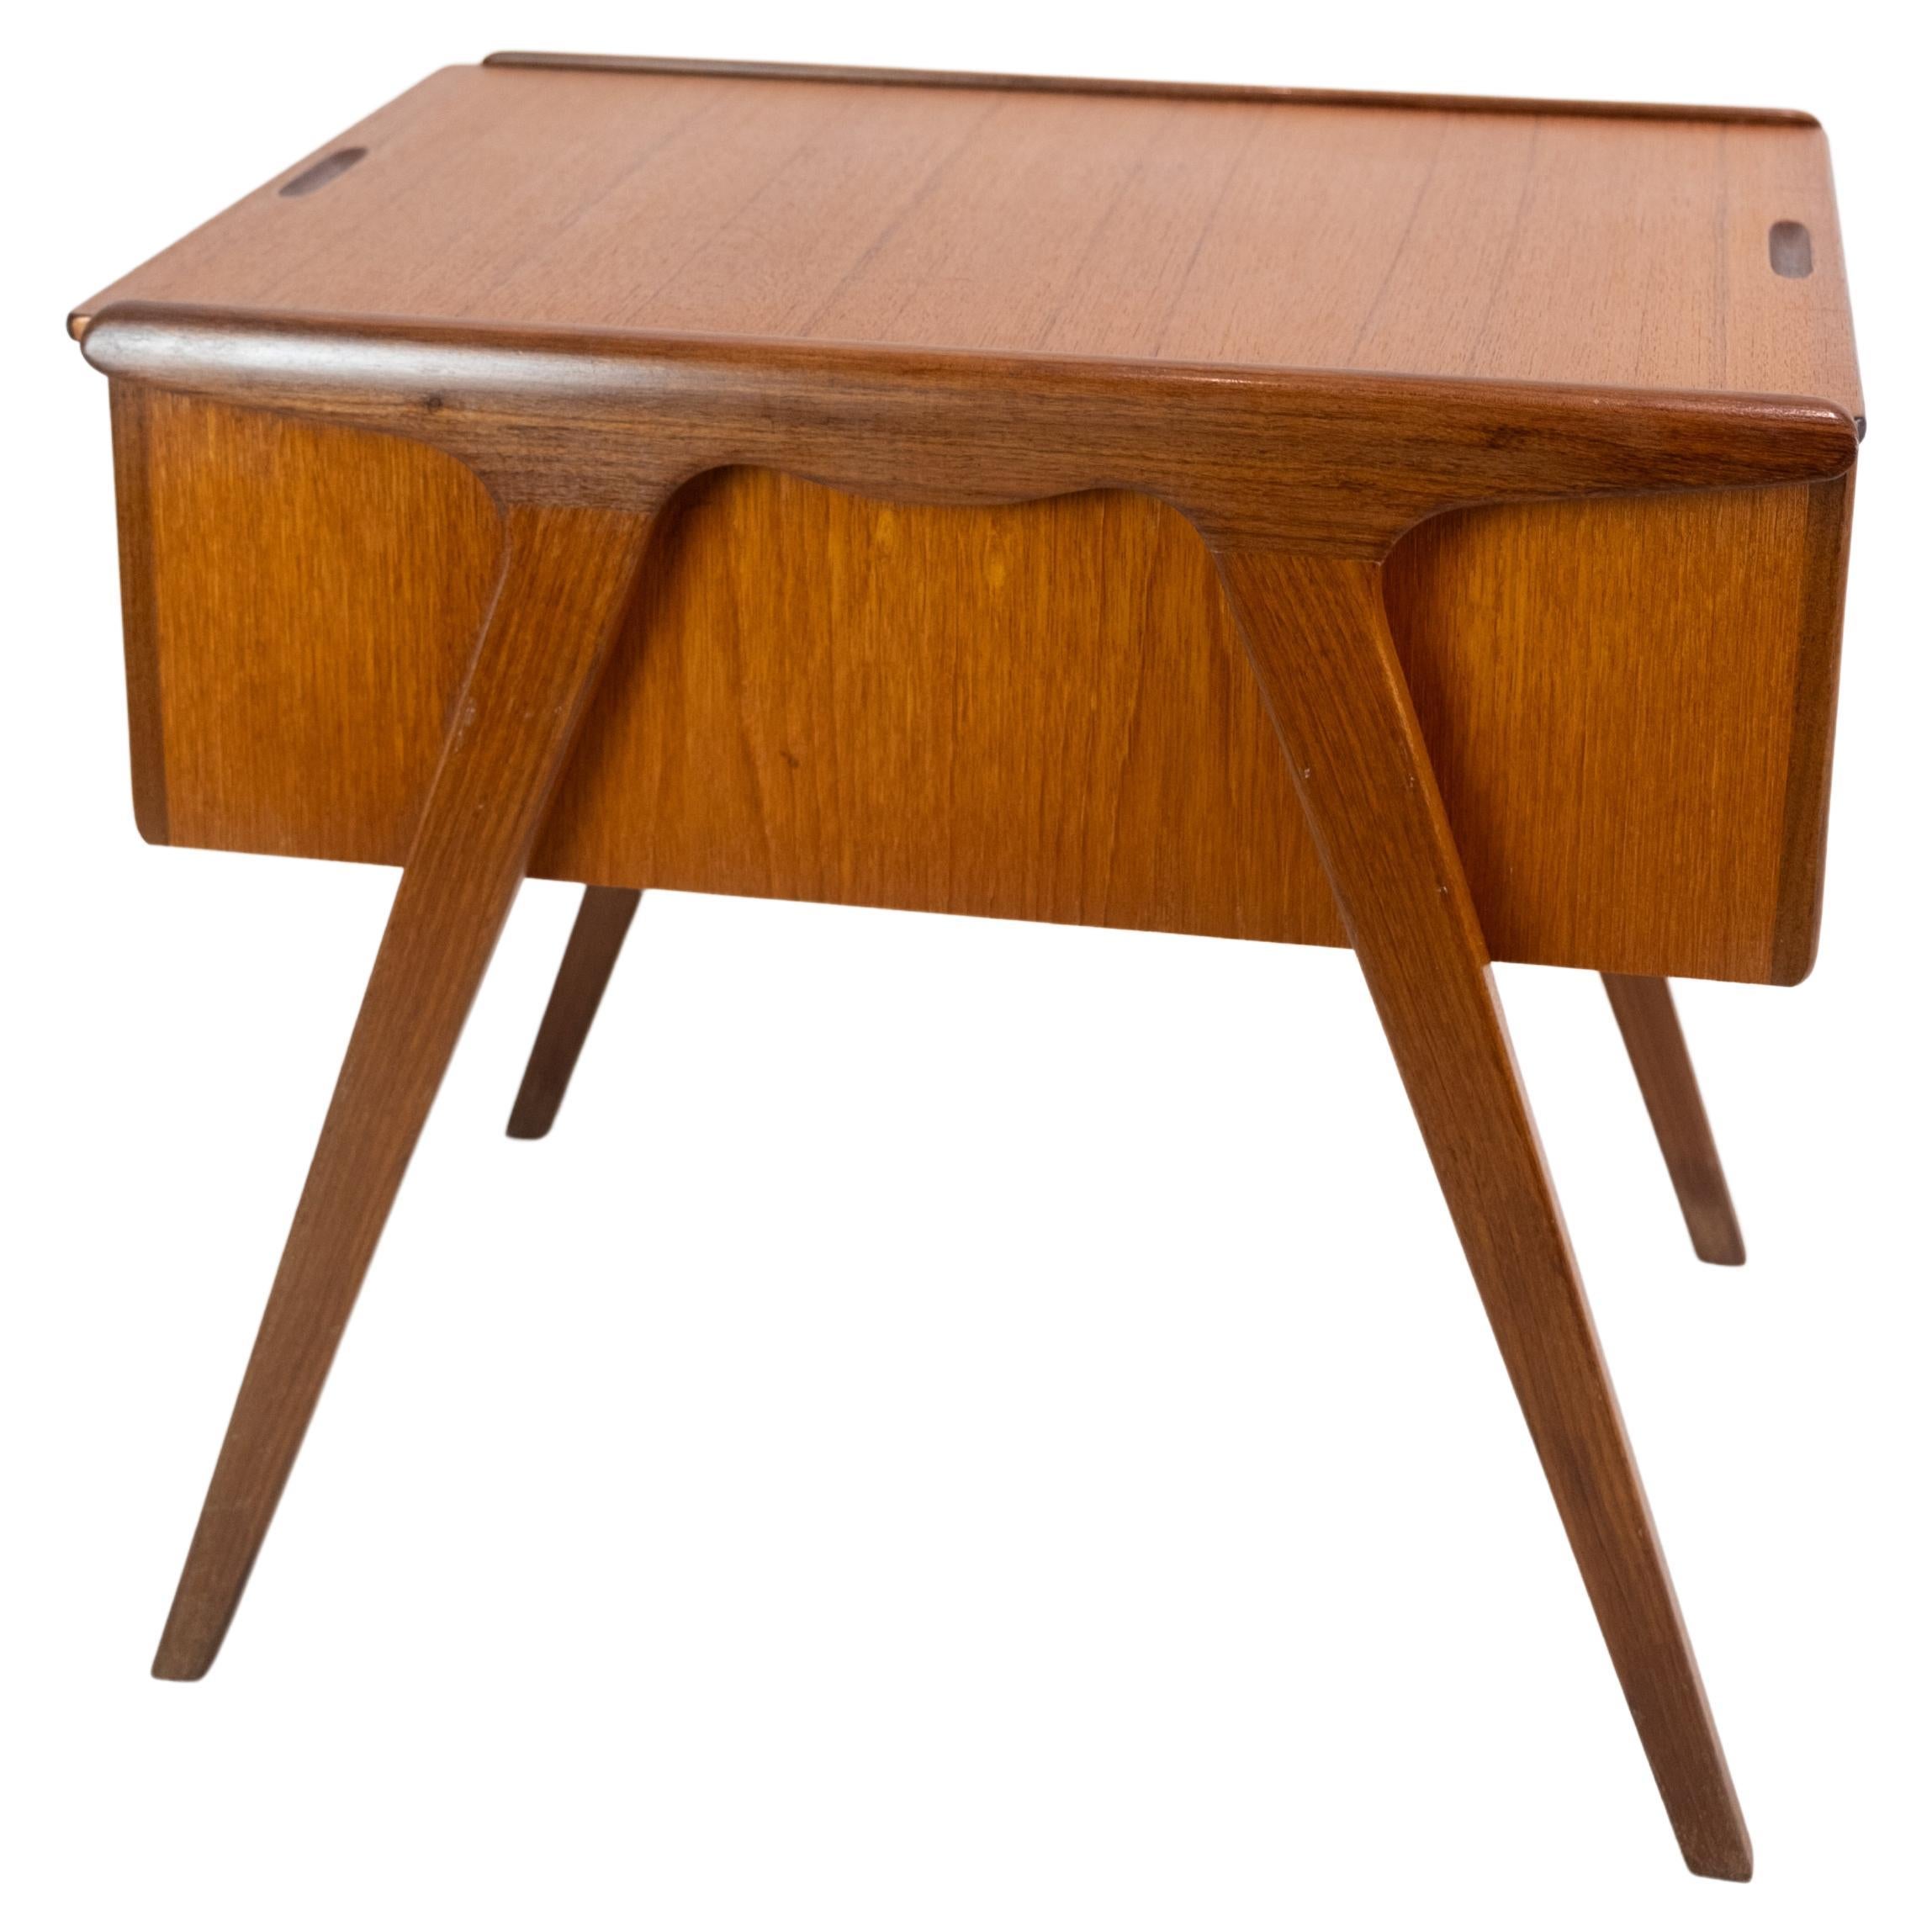 Sewing Table in Teak Wood of Danish Design From The 1960's For Sale